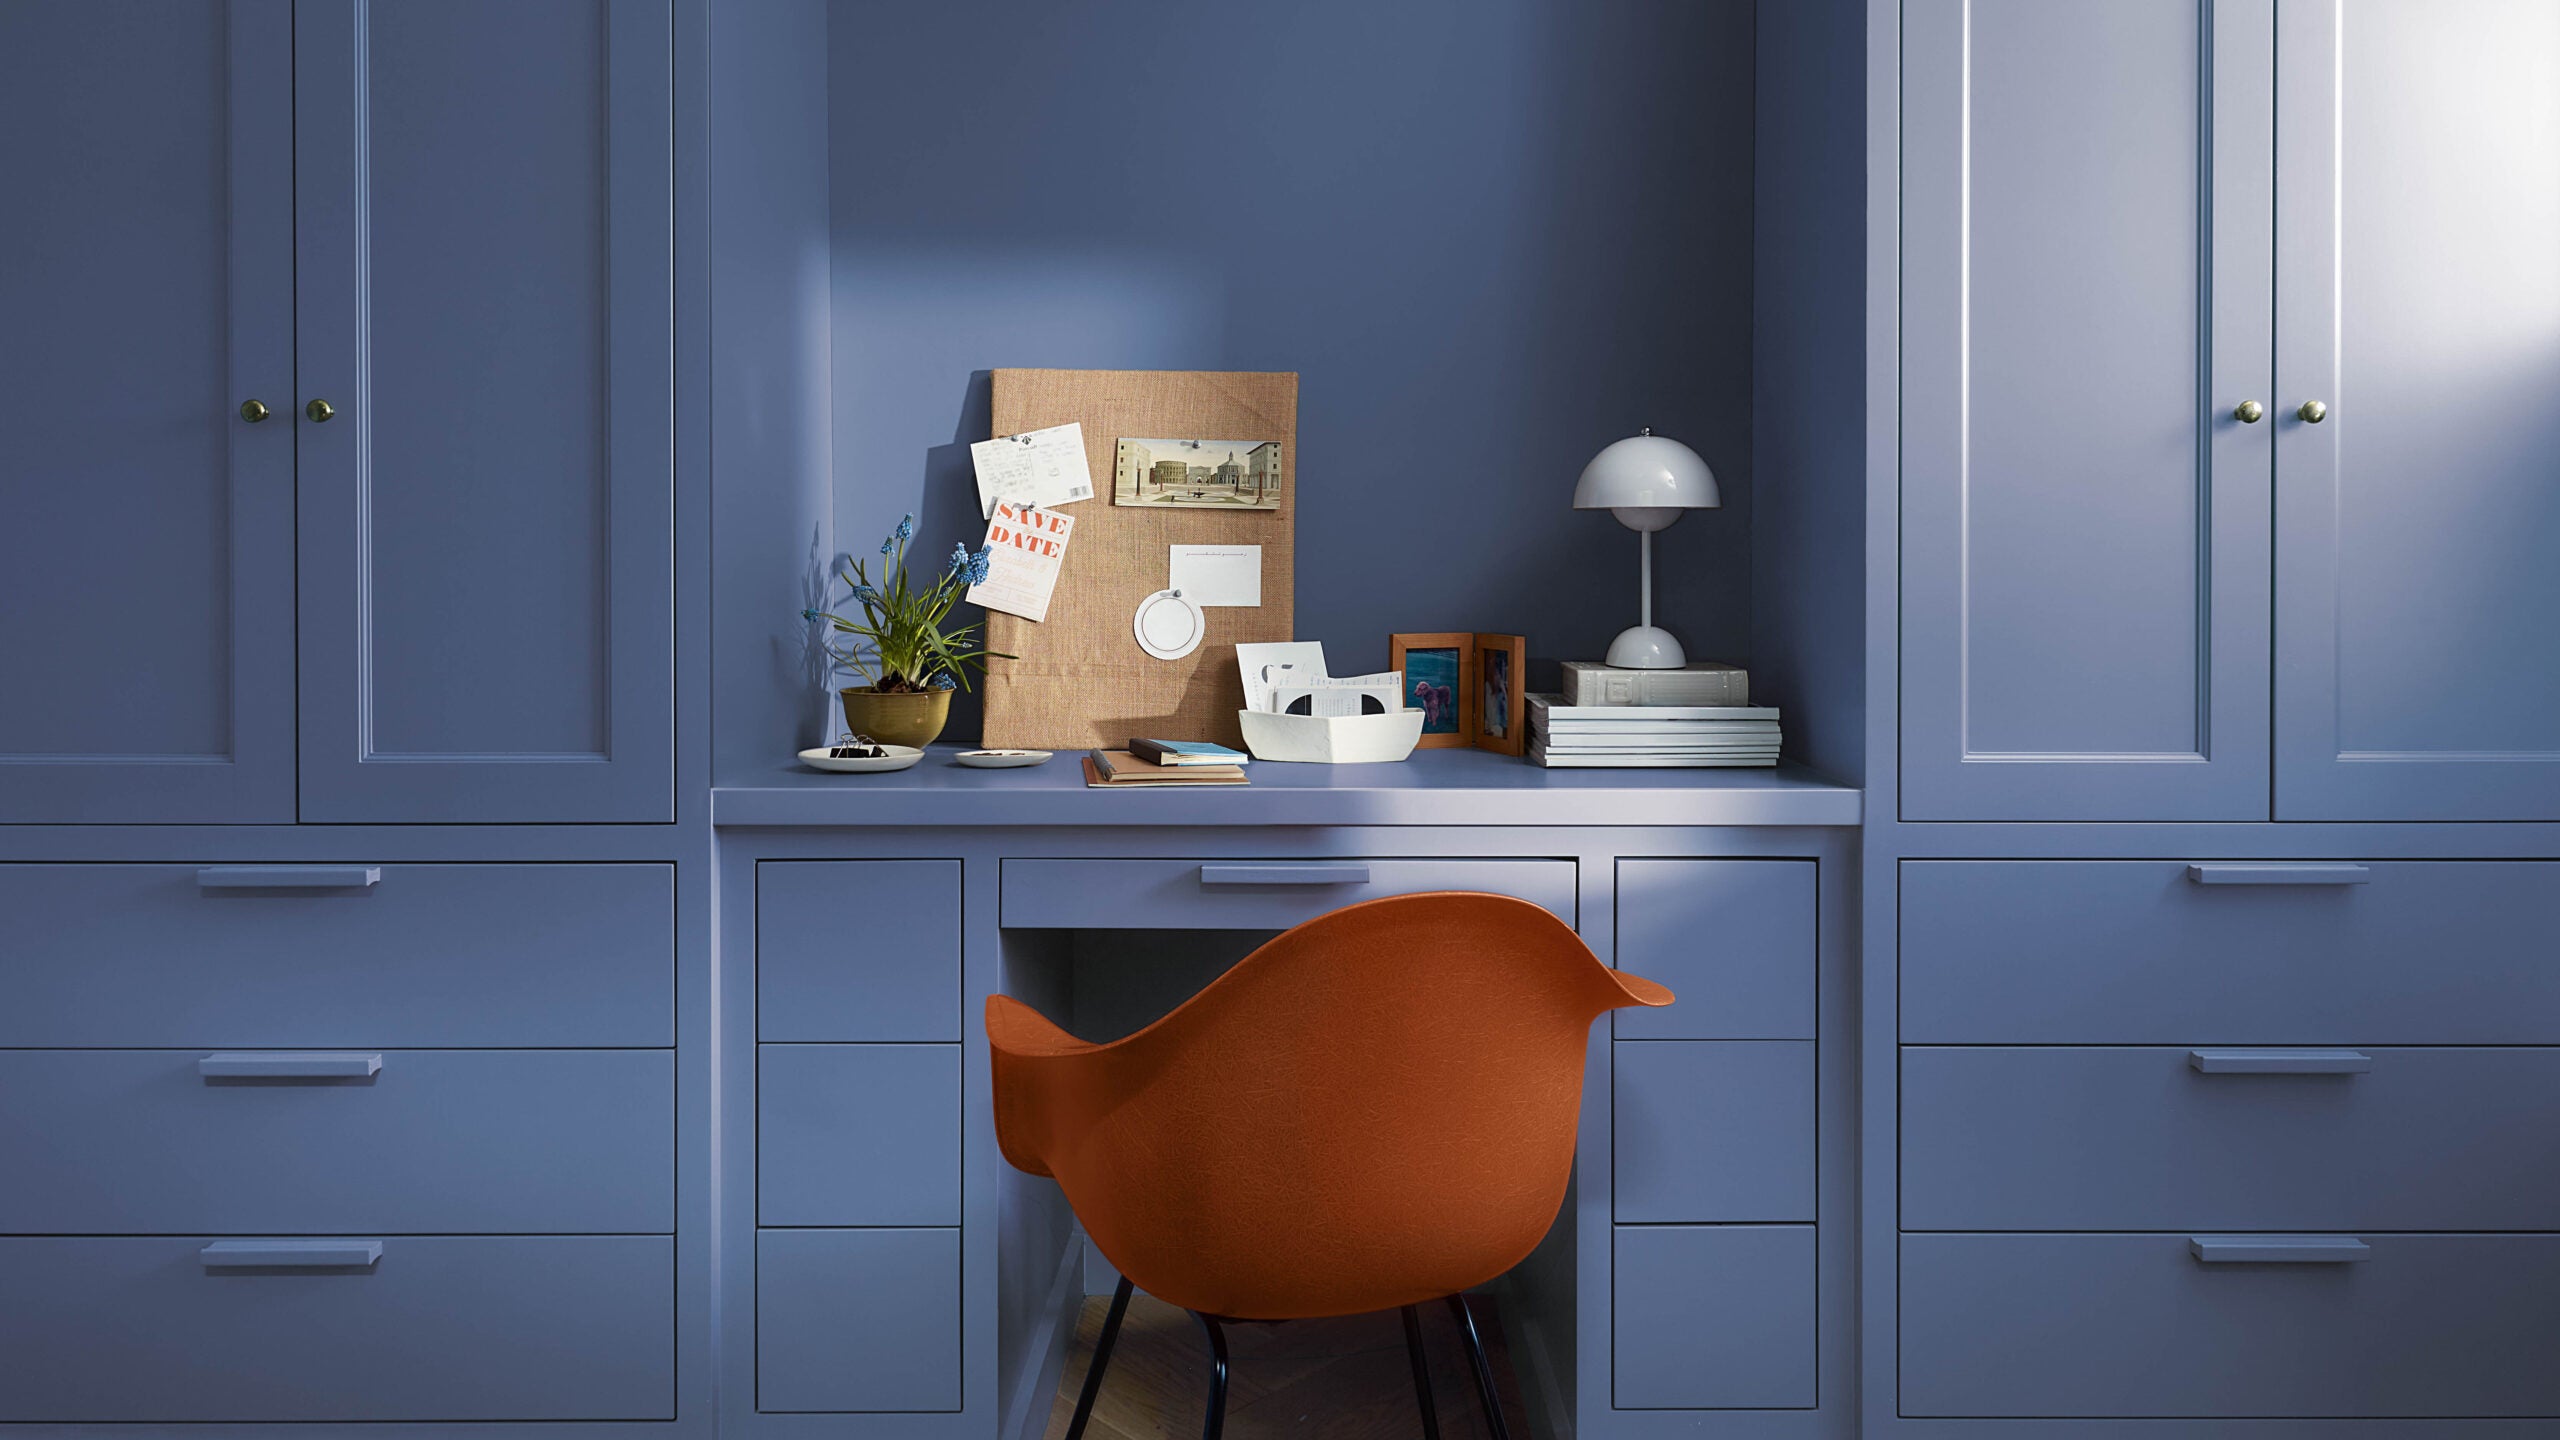 An orange chair sits at a desk built into the dark blue wall with cabinets on either side, and a few related items on the desk. 